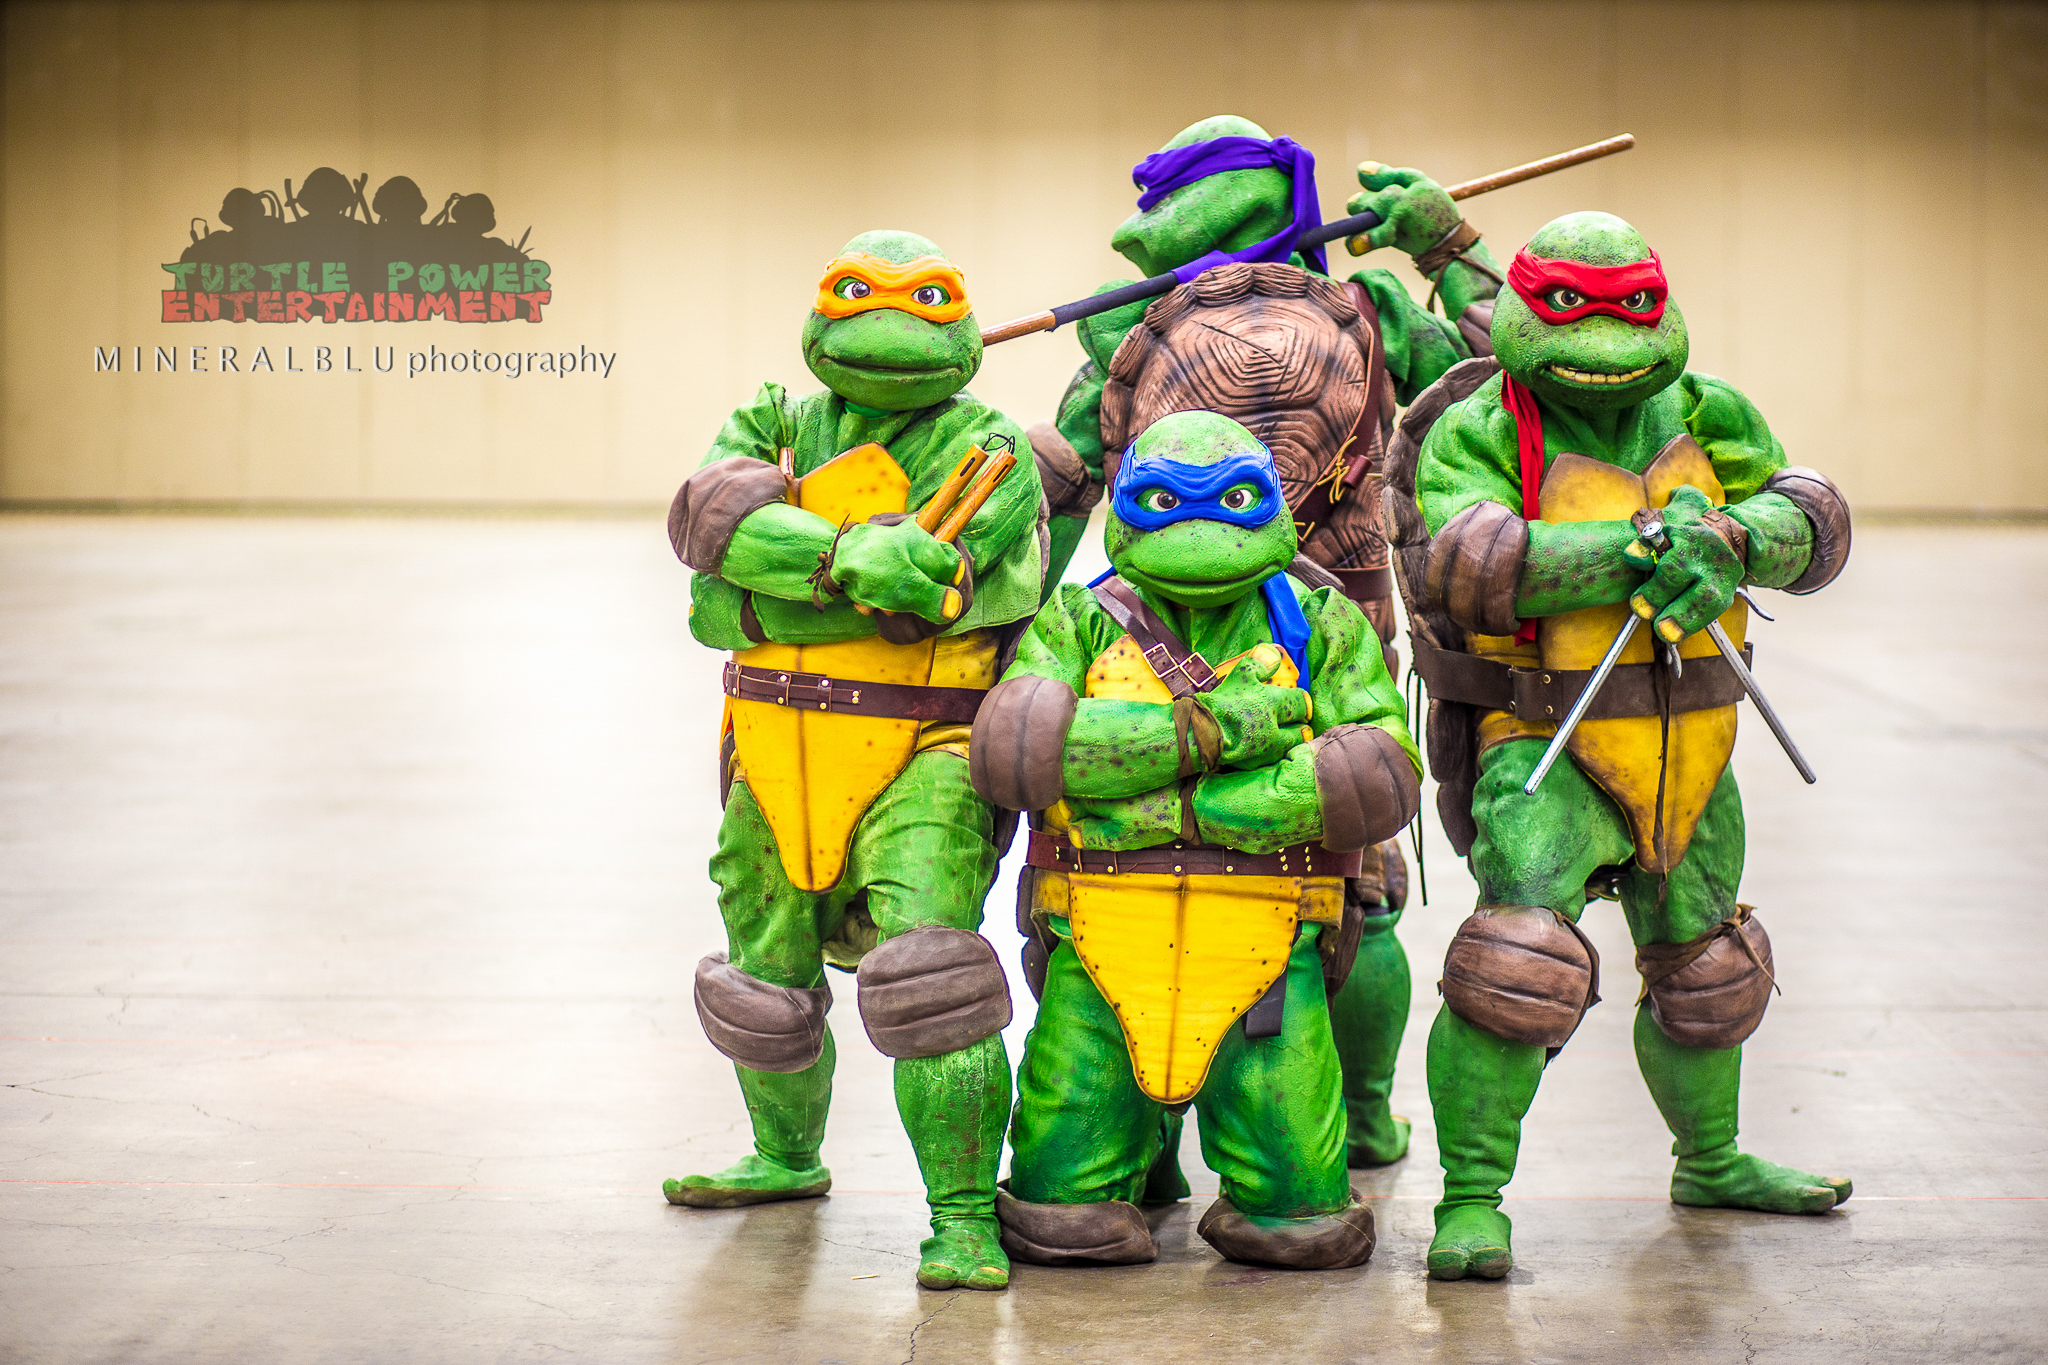 Mineralblu Photography with Turtle Power Entertainment at Dallas Comic-Con.